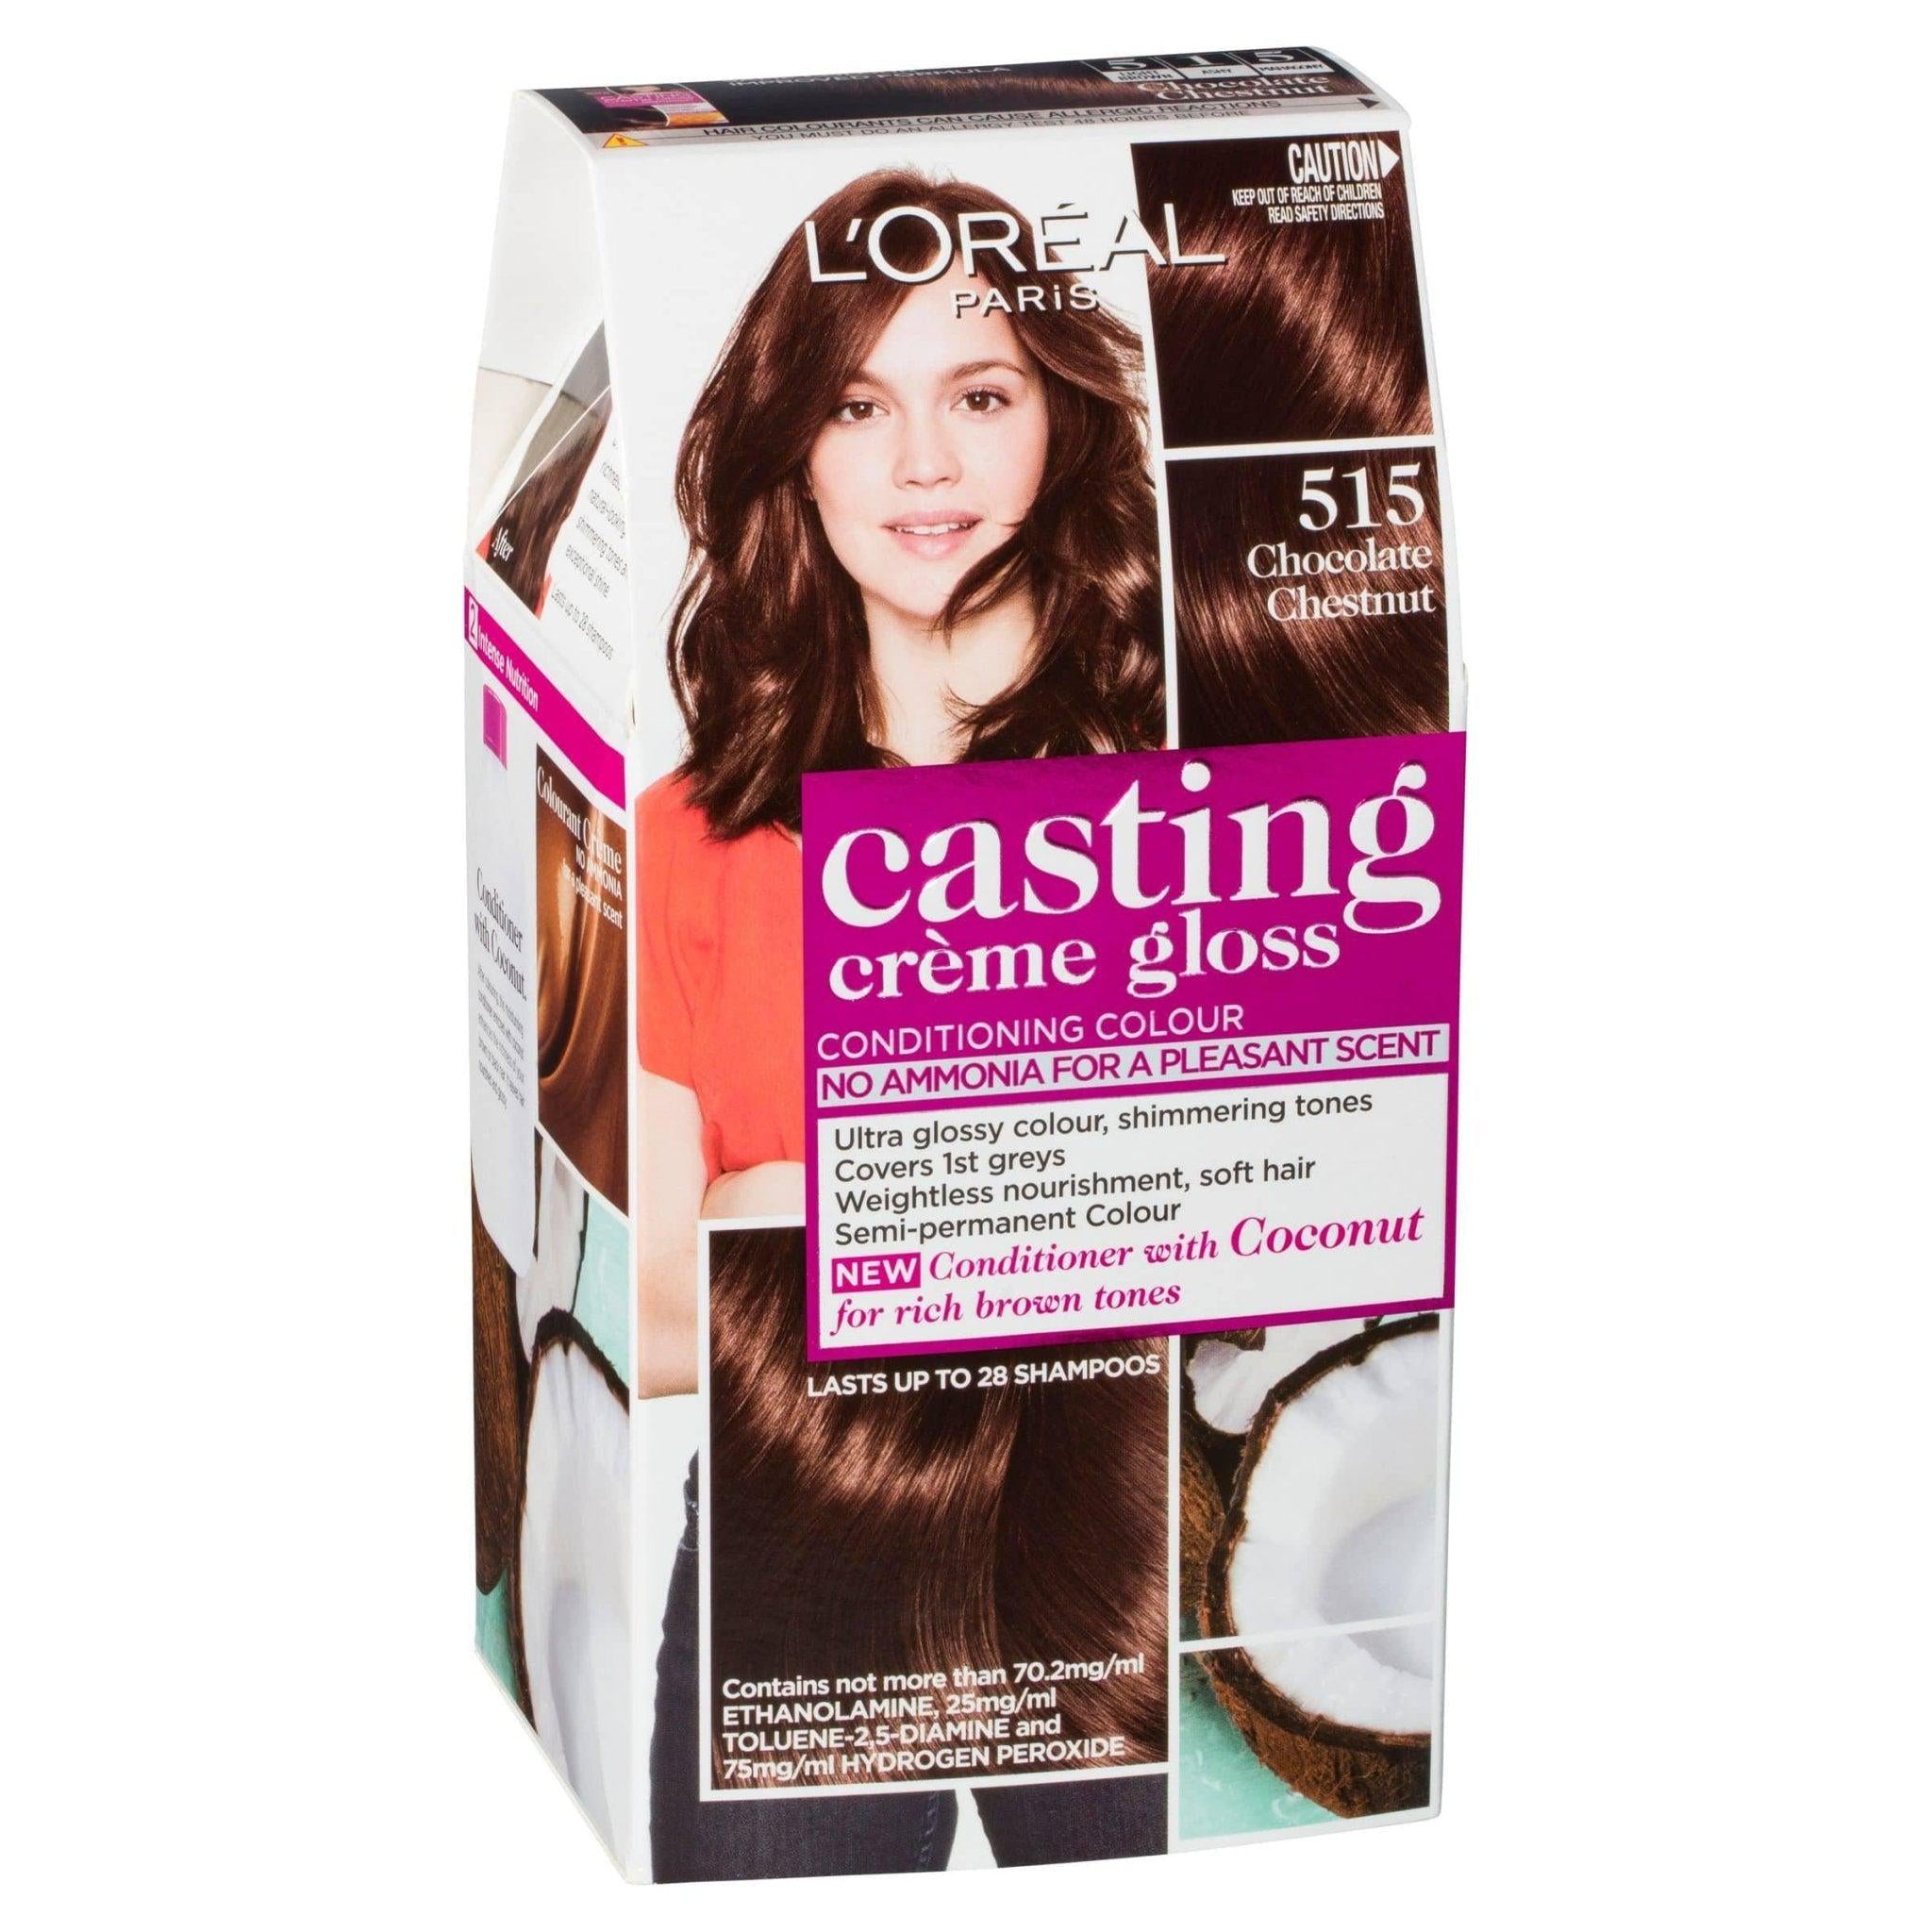 L'oreal Casting Creme Gloss Semi-Permanent Hair Color - Chocolate Chestnut 515 - Healthxpress.ie